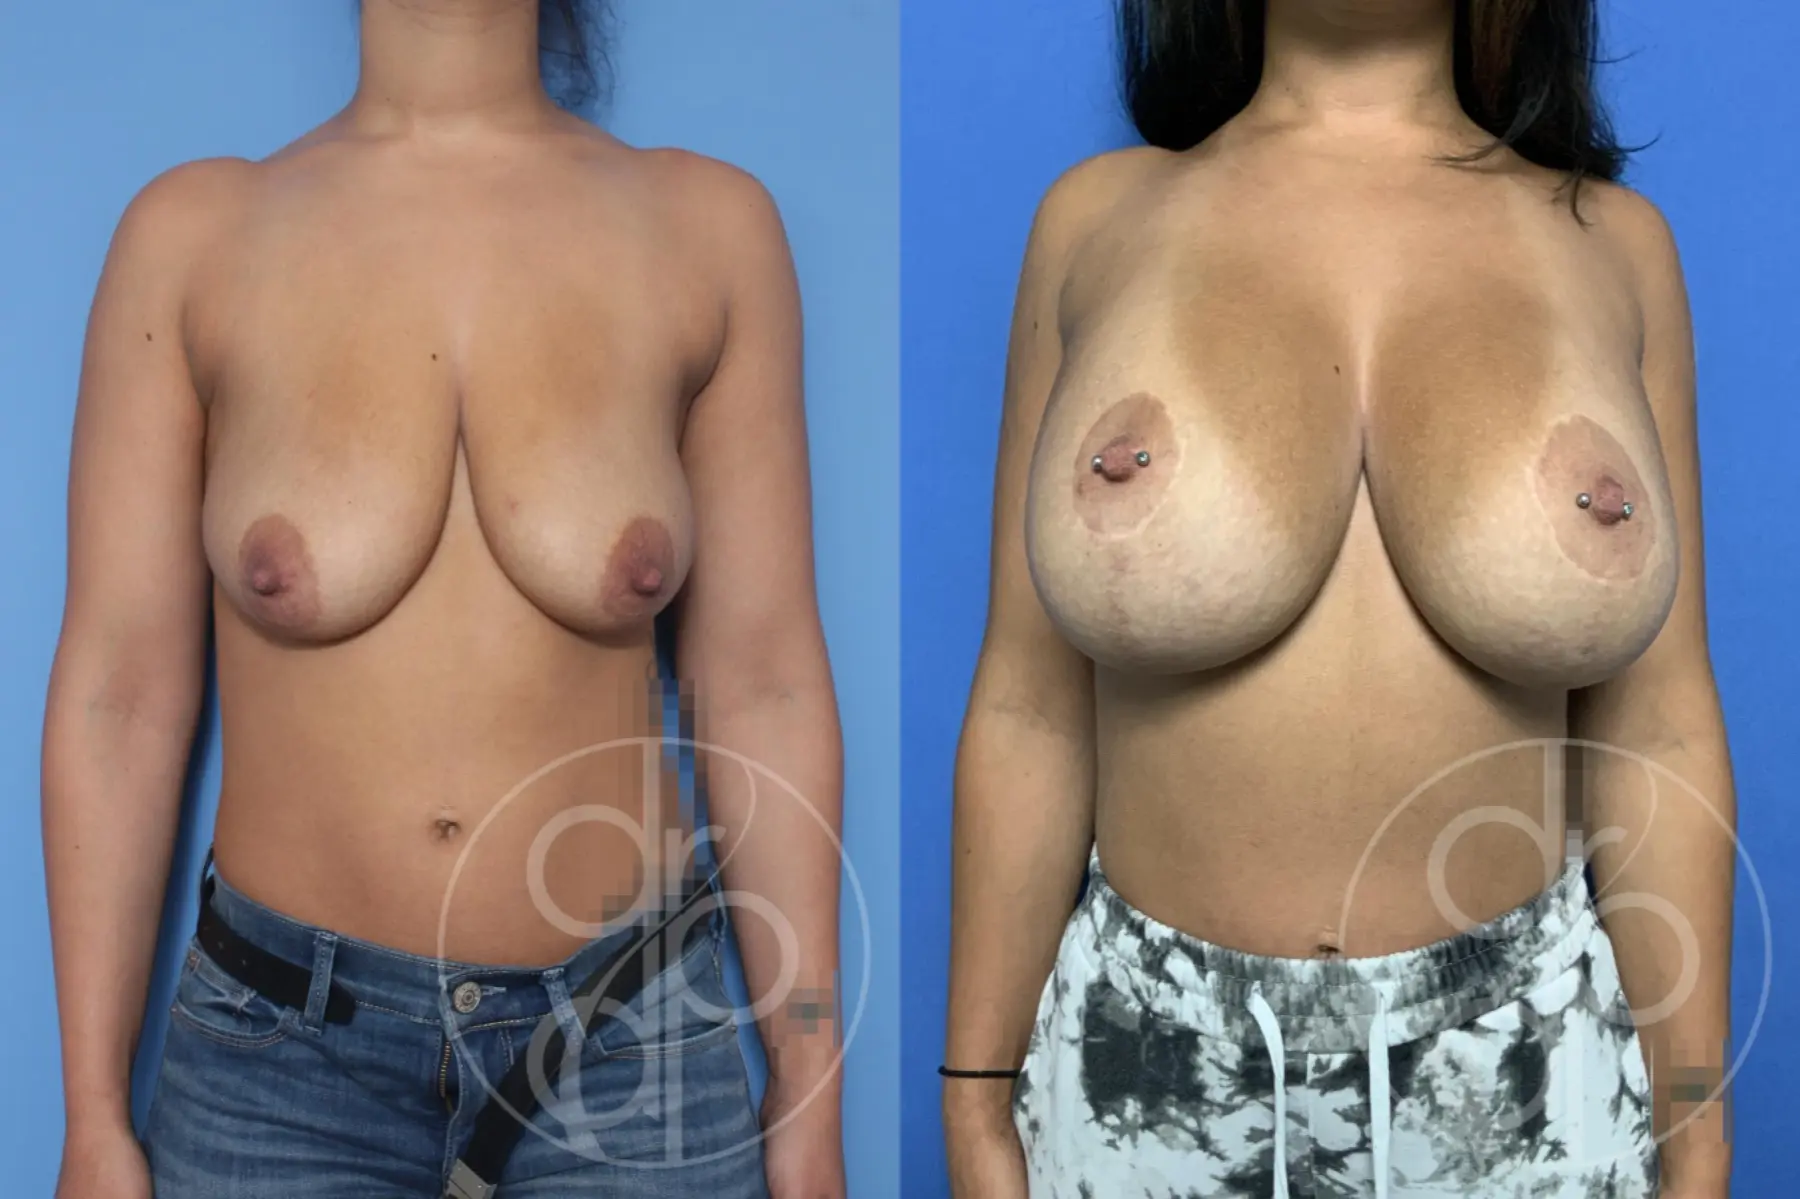 Breast Augmentation With Lift: Patient 5 - Before and After  